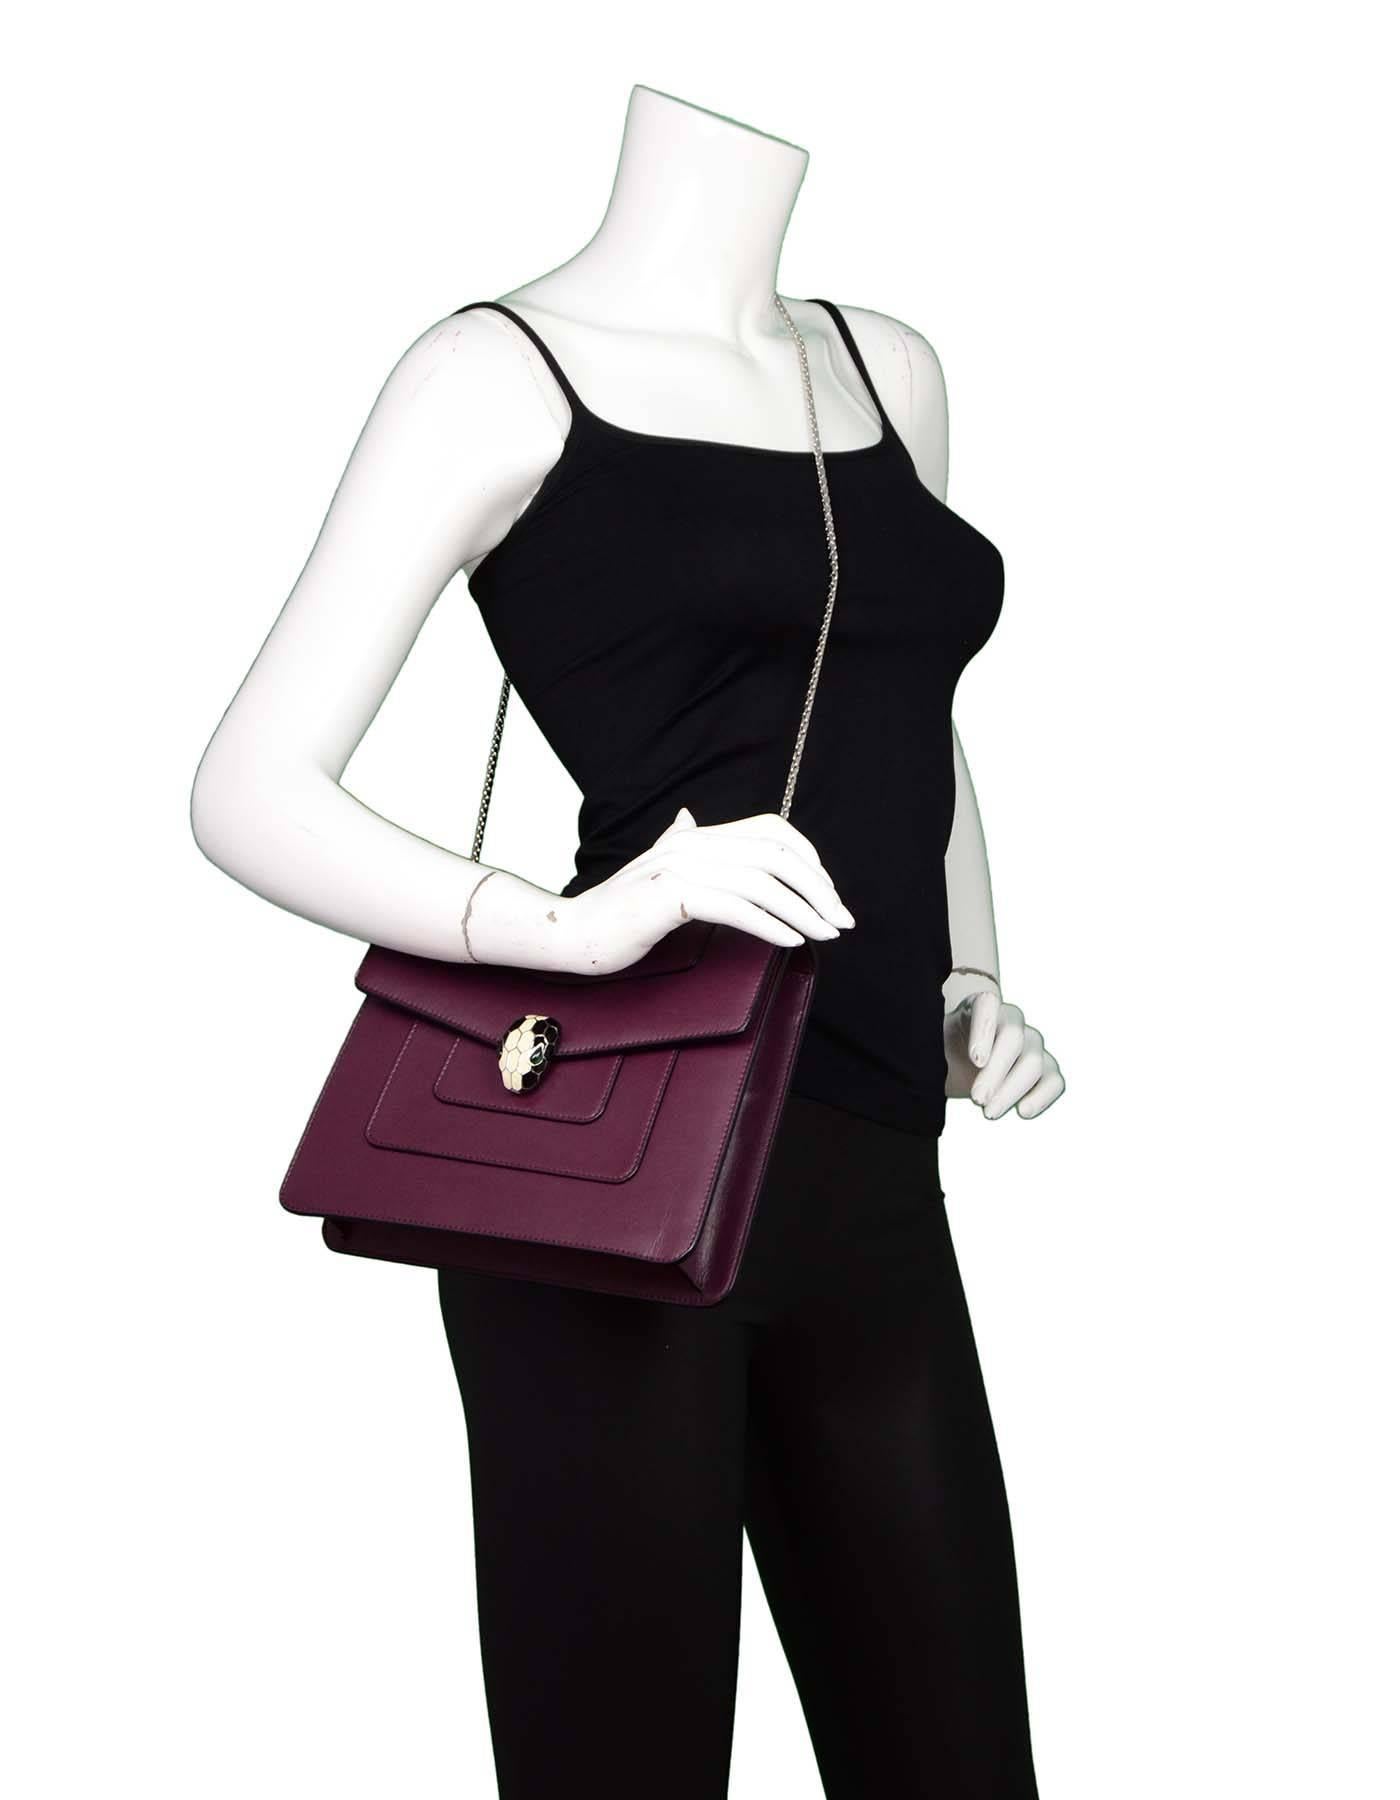 Bvlgari Burgundy Leather Serpenti Forever Flap Bag

Features light gold-plated brass 